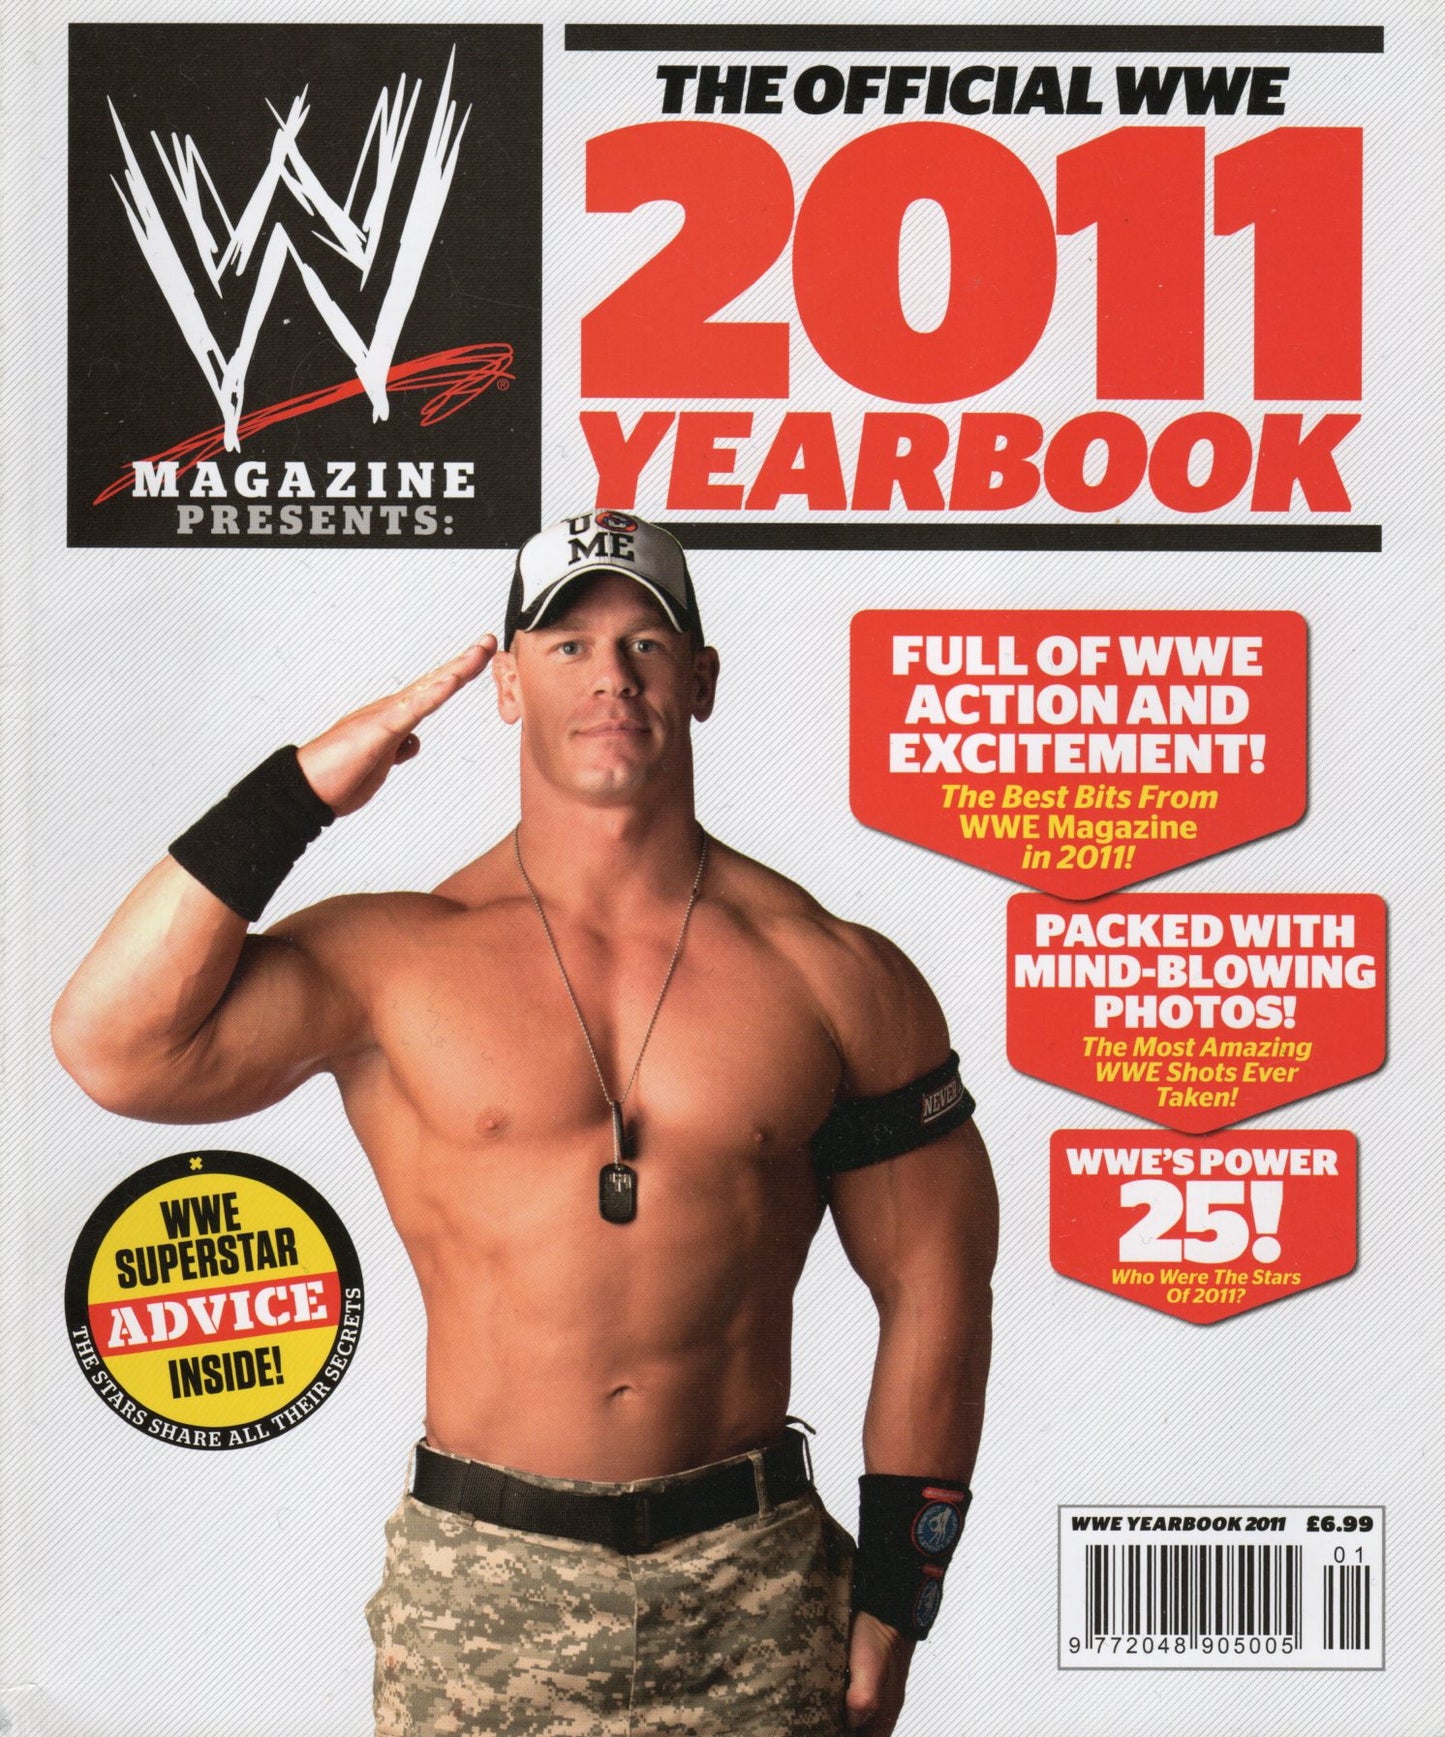 WWE Magazine Presents The Official 2011 Yearbook